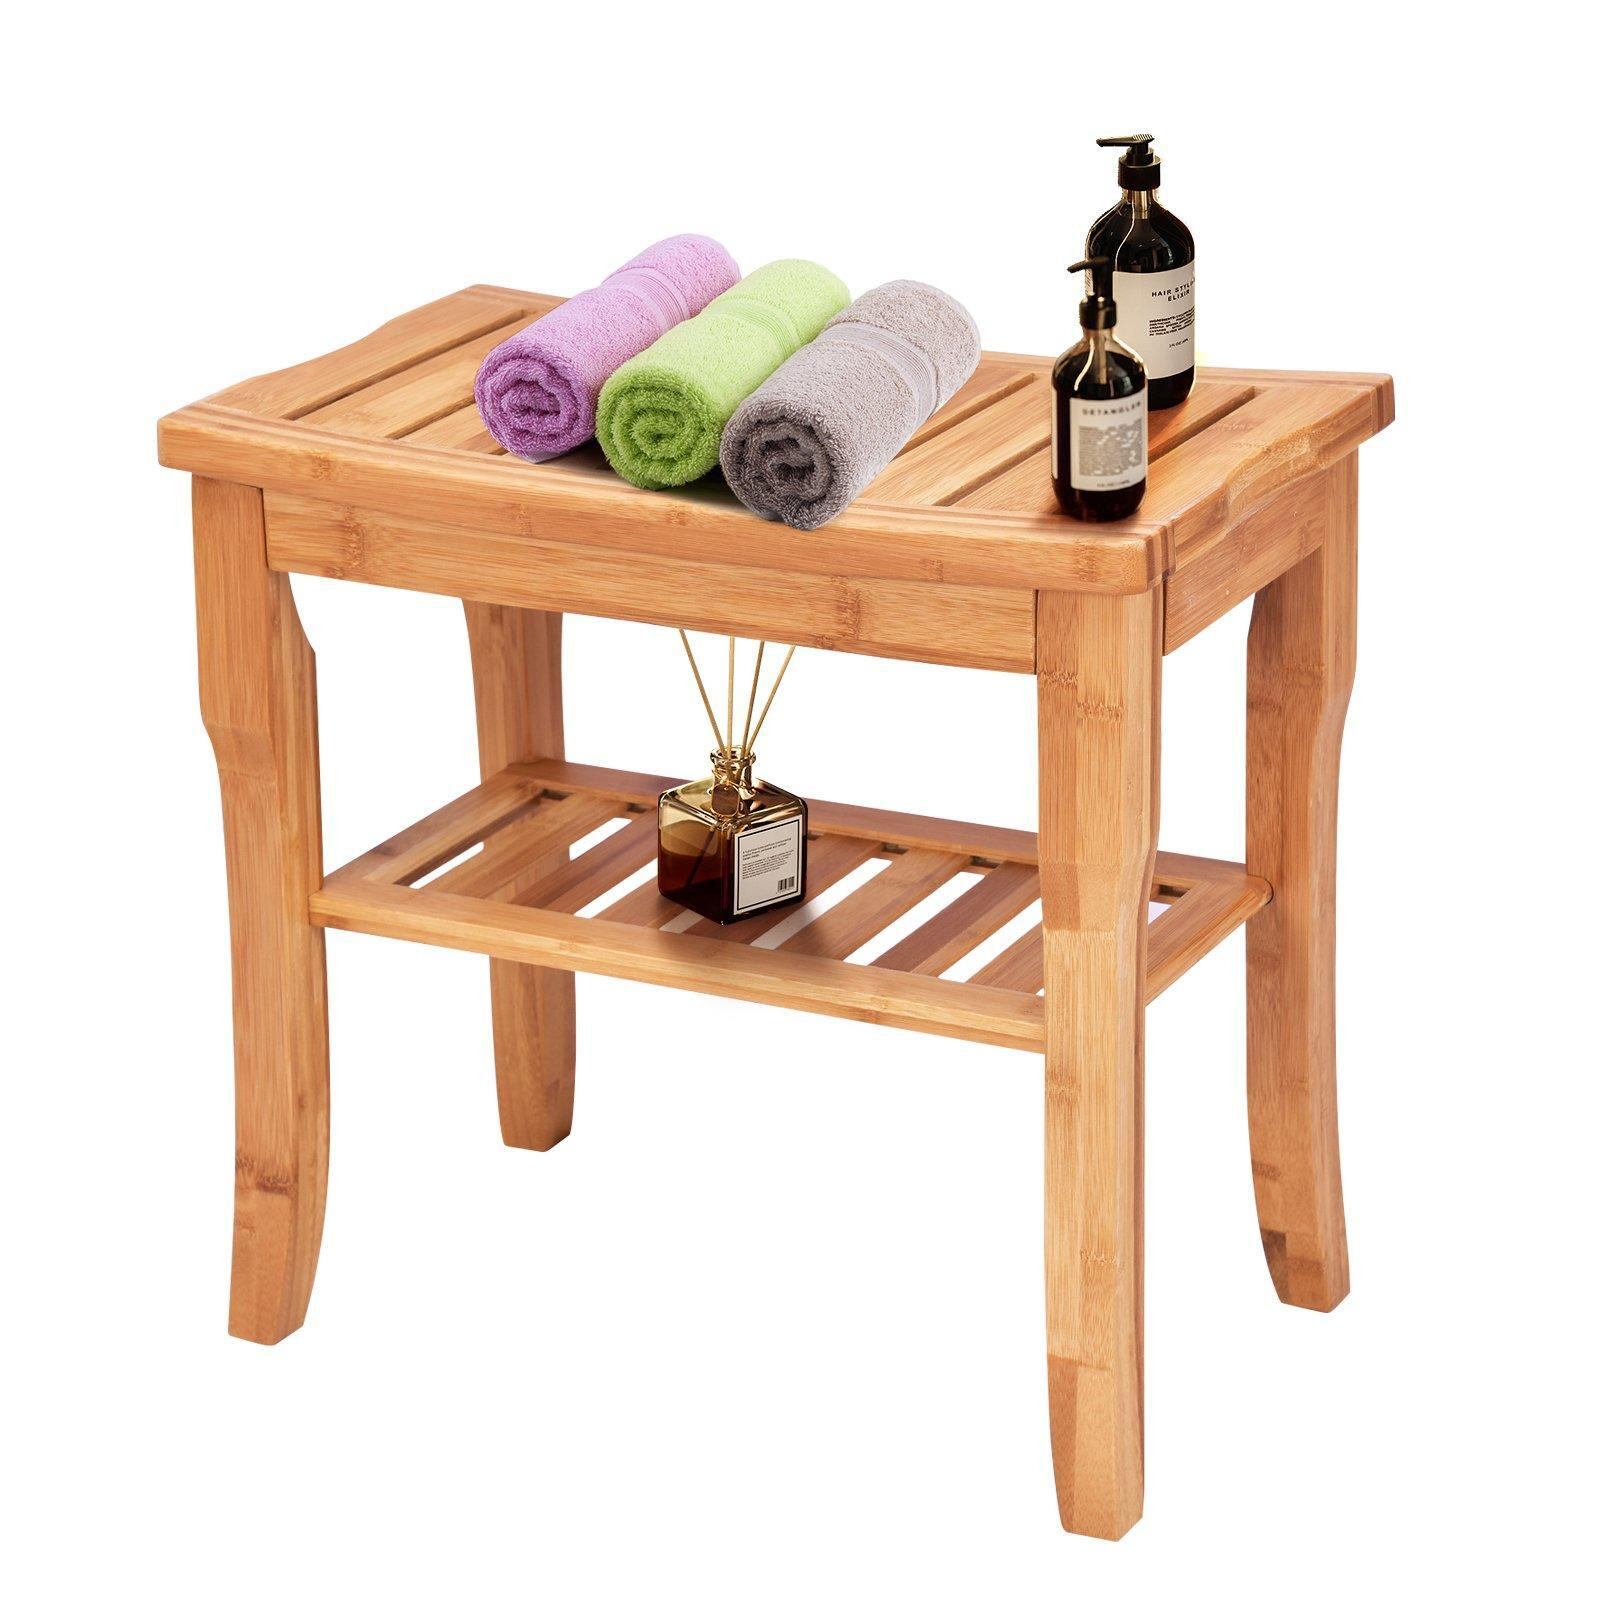 Bamboo Shower Chair Bathroom Shower Bench Seat Spa Chair - image 1